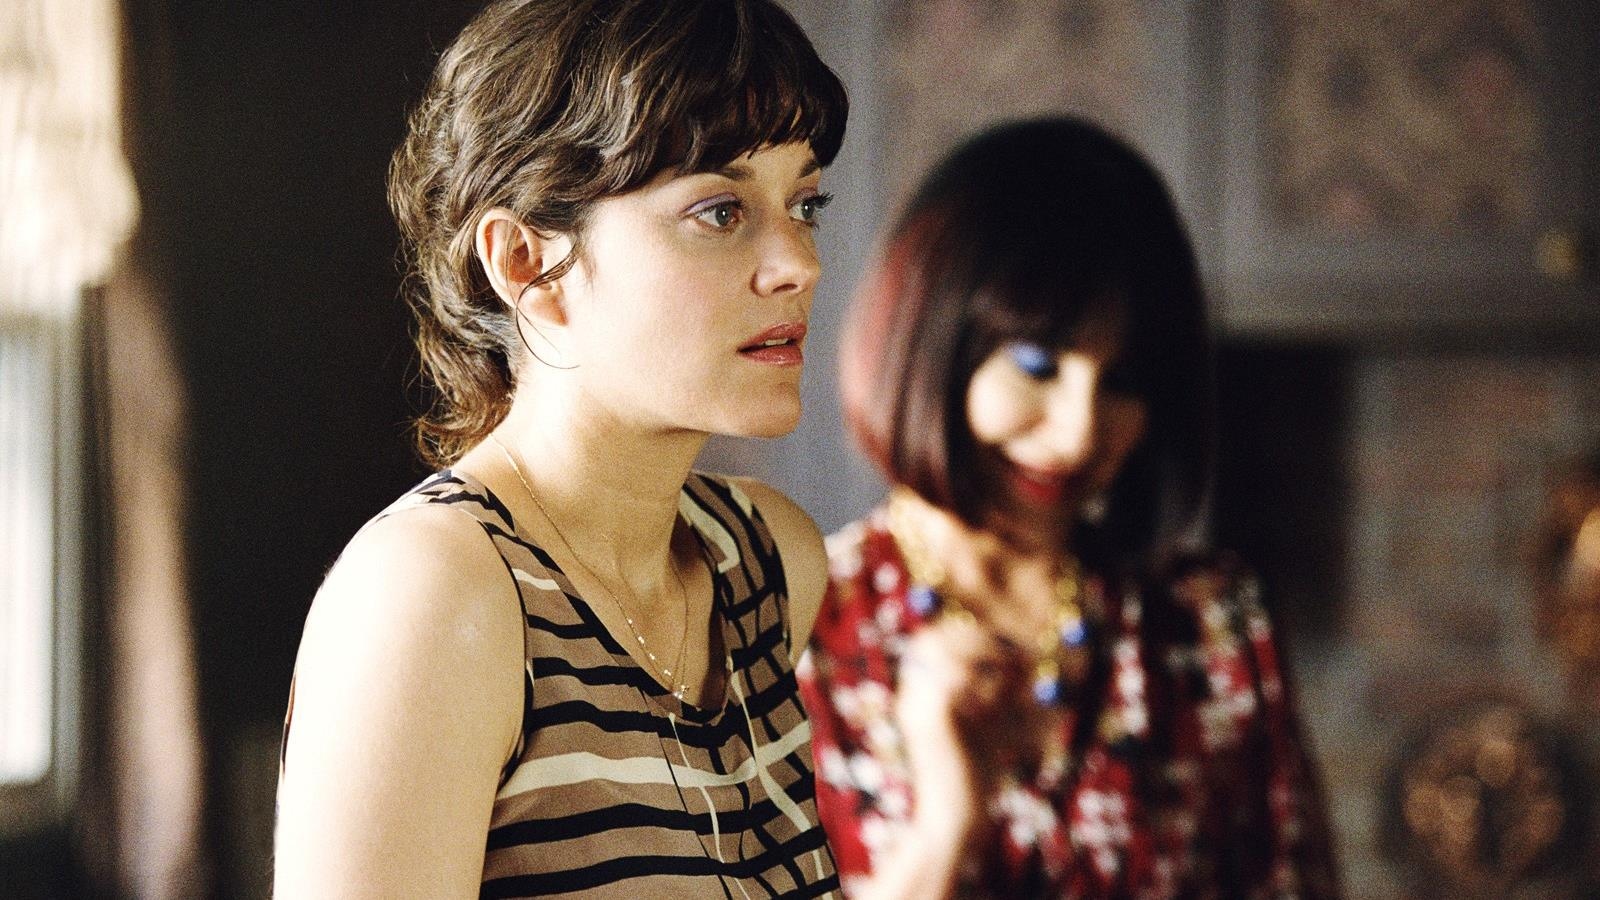 A busy-looking woman (Marion Cotillard) in front of a woman in a flashy outfit (Natalie Bay).